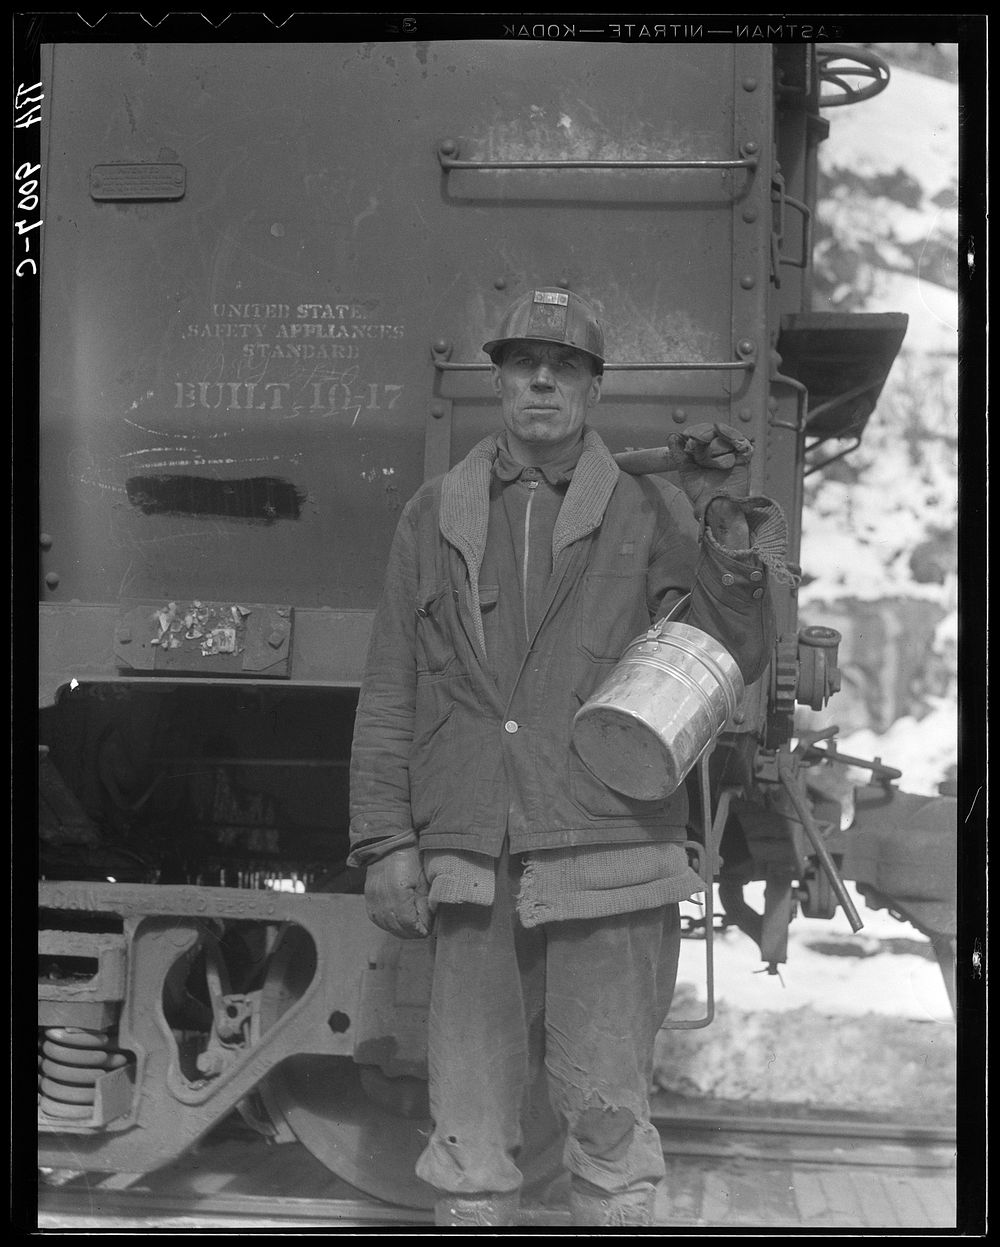 Utah coal miner. Consumers, near Price, Utah. Sourced from the Library of Congress.